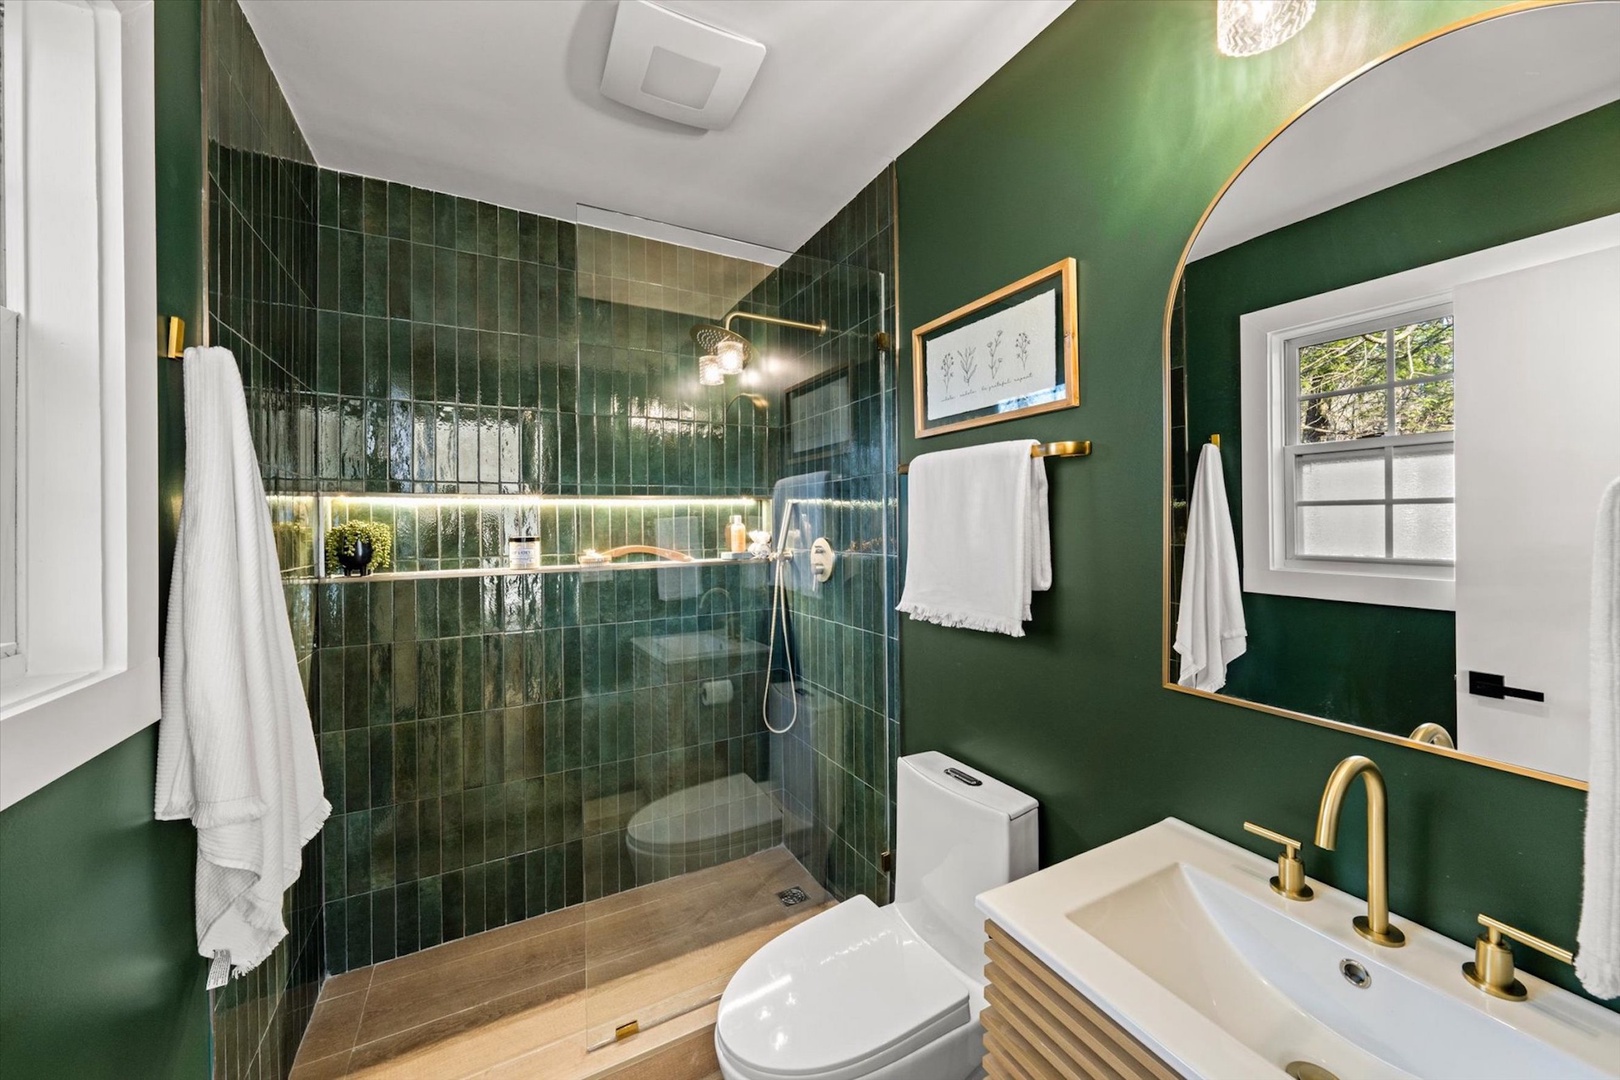 This luxurious ensuite offers a chic single vanity & spa-like glass shower